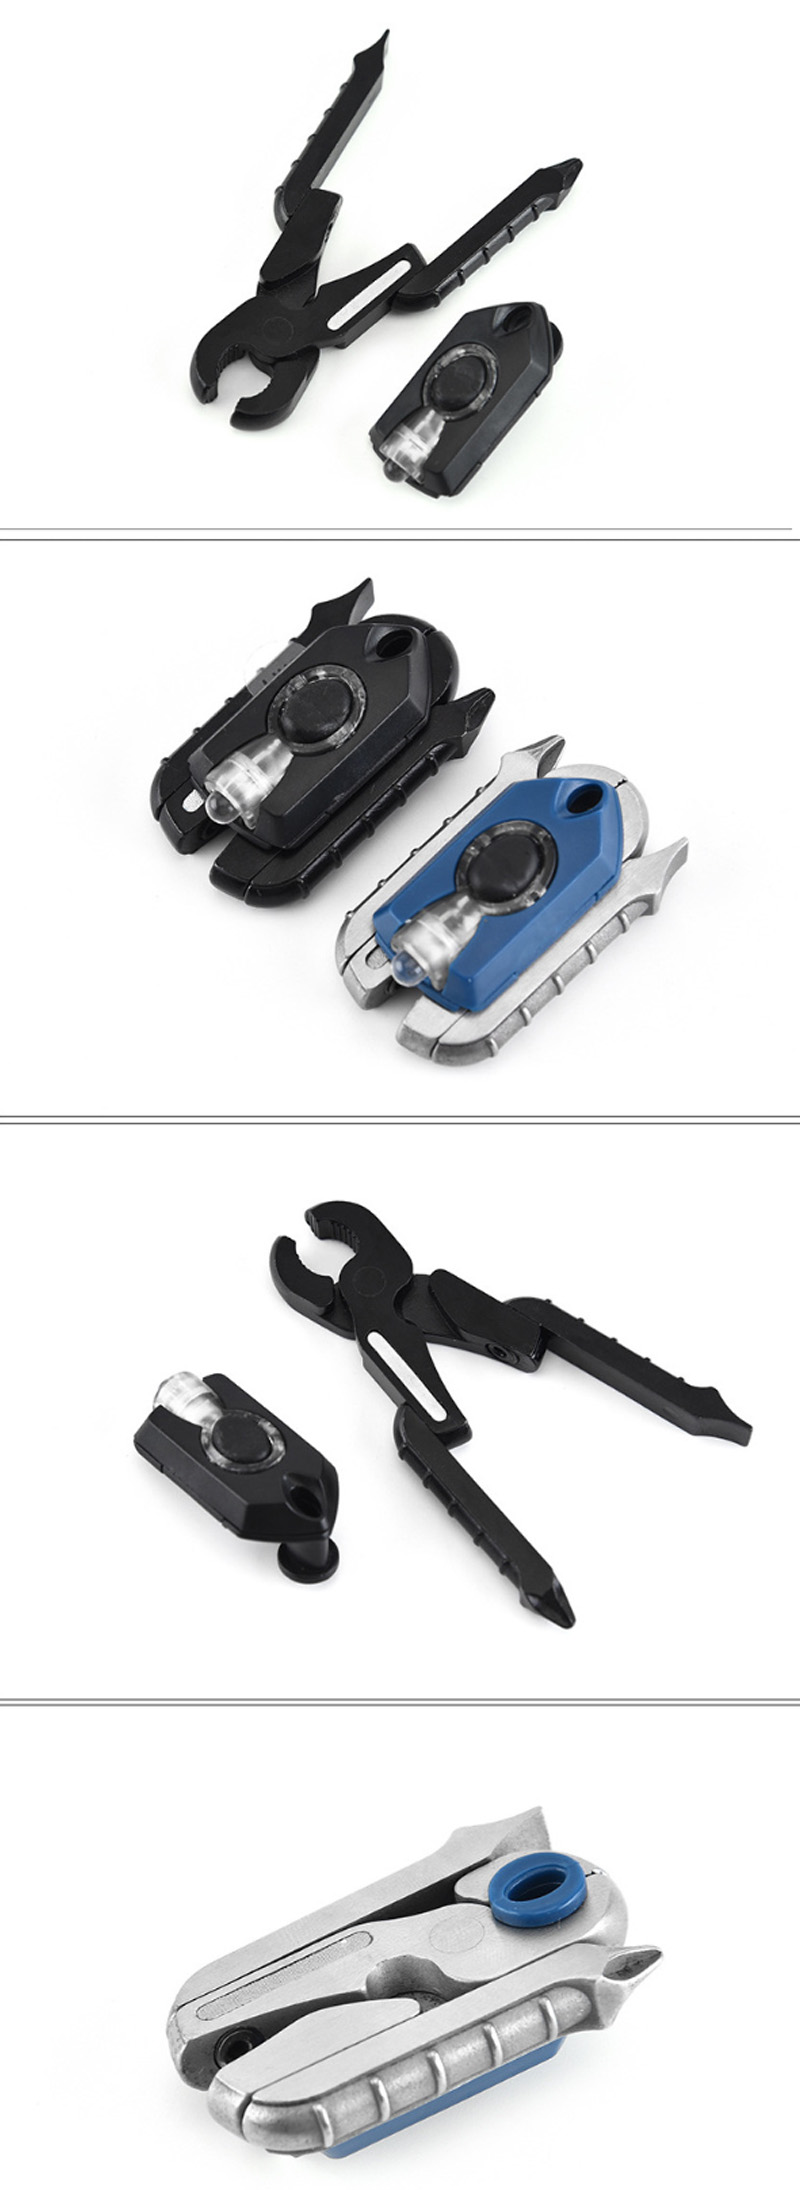 Multi-function-Folding-Pliers-Mini-EDC-Bicycle-Repair-Tool-with-LED-Light-Outdoor-Survival-Camping-T-1588249-2